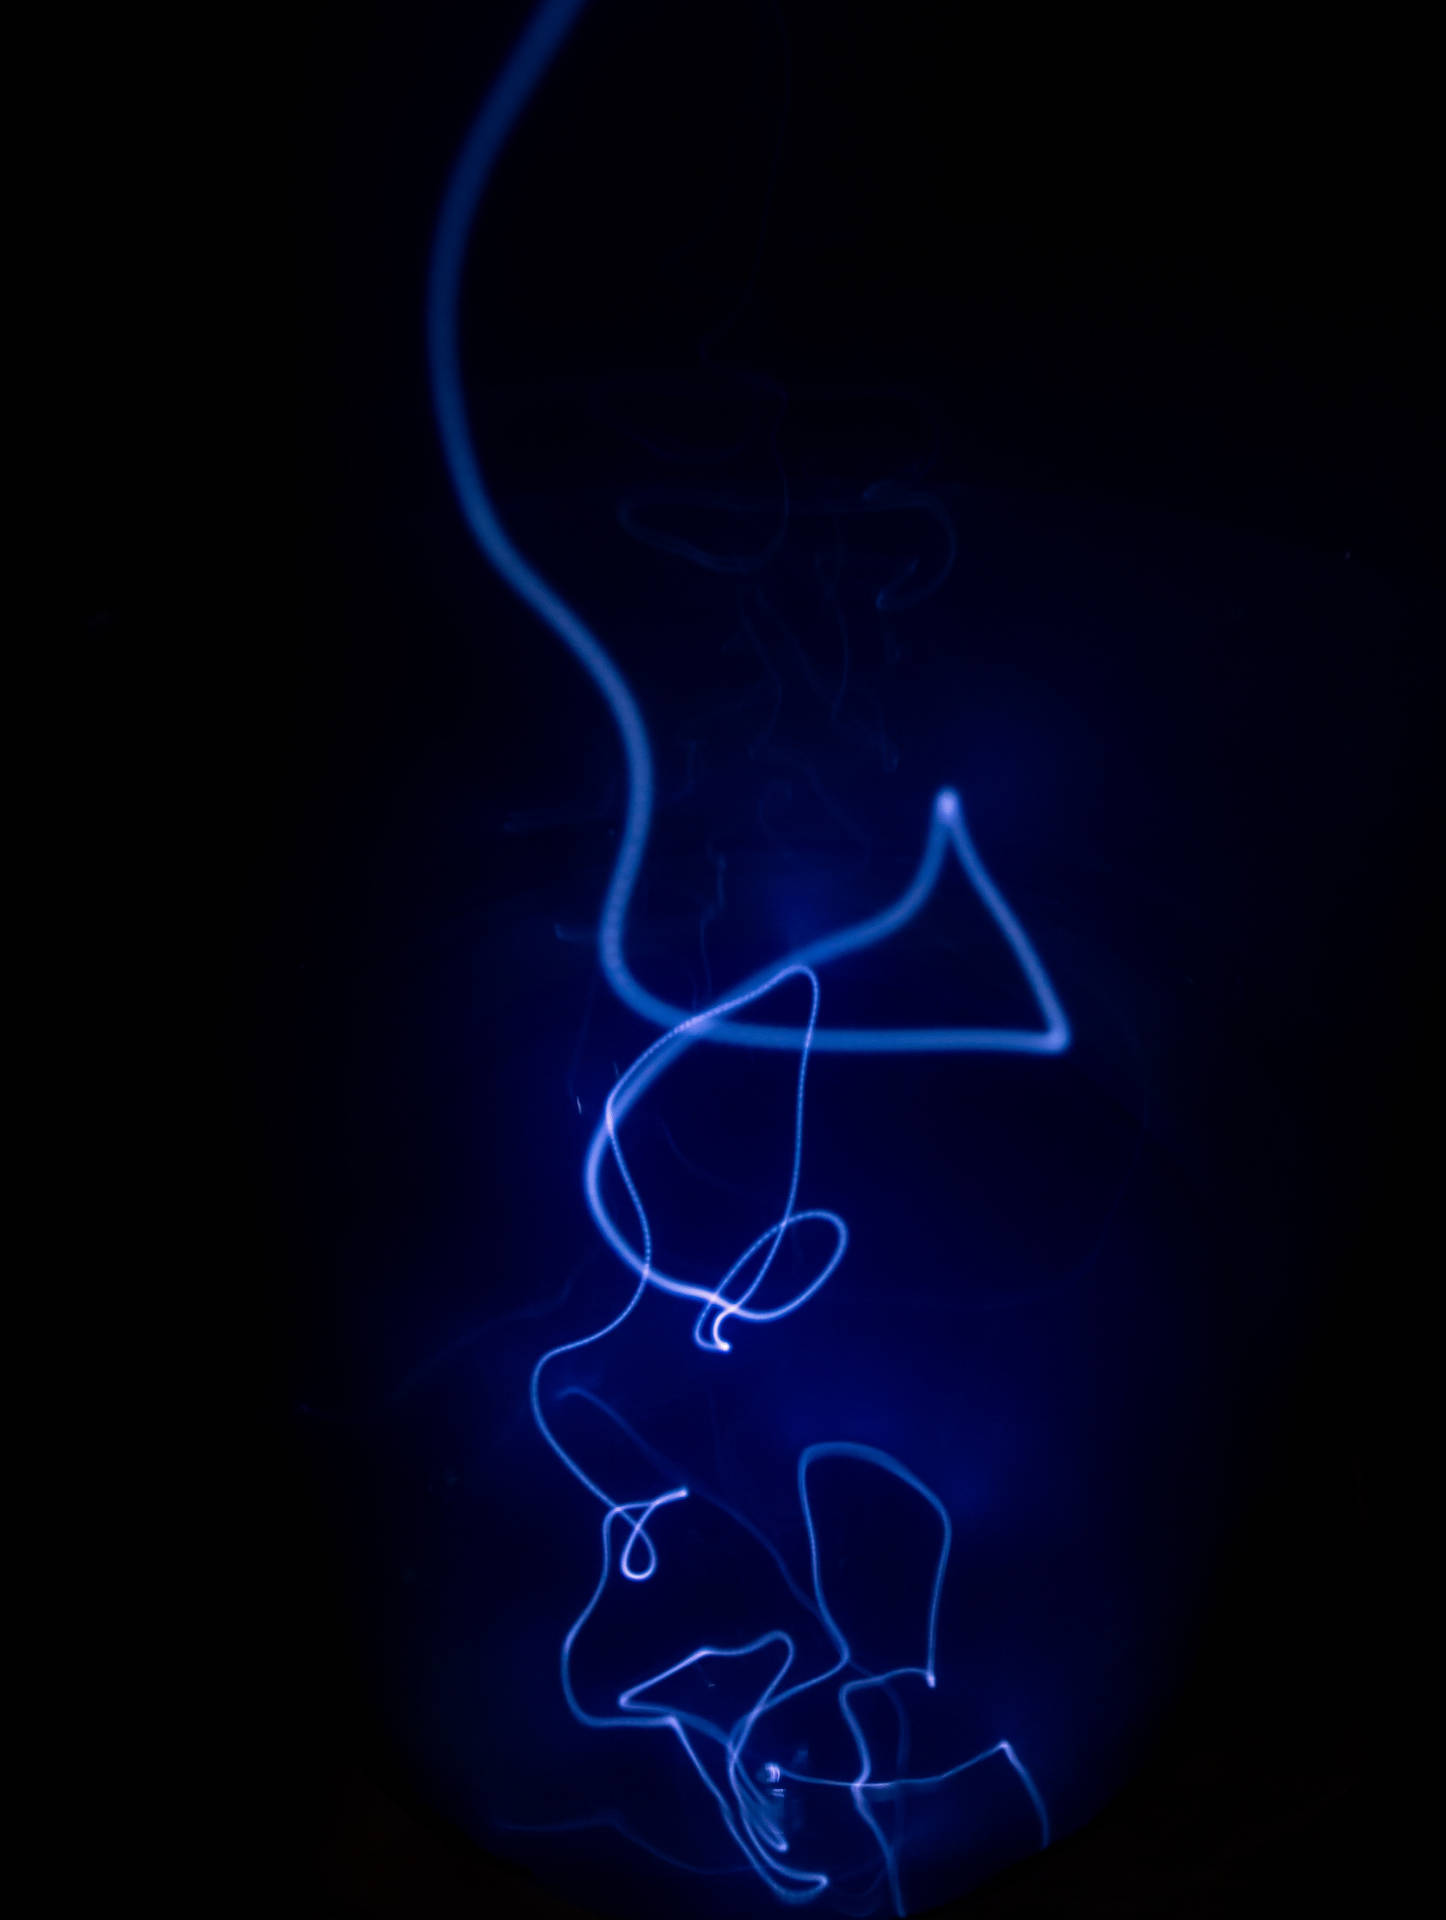 Brighten Up Your Environment With This Abstract, Light Blue Neon Beam Of Light Wallpaper